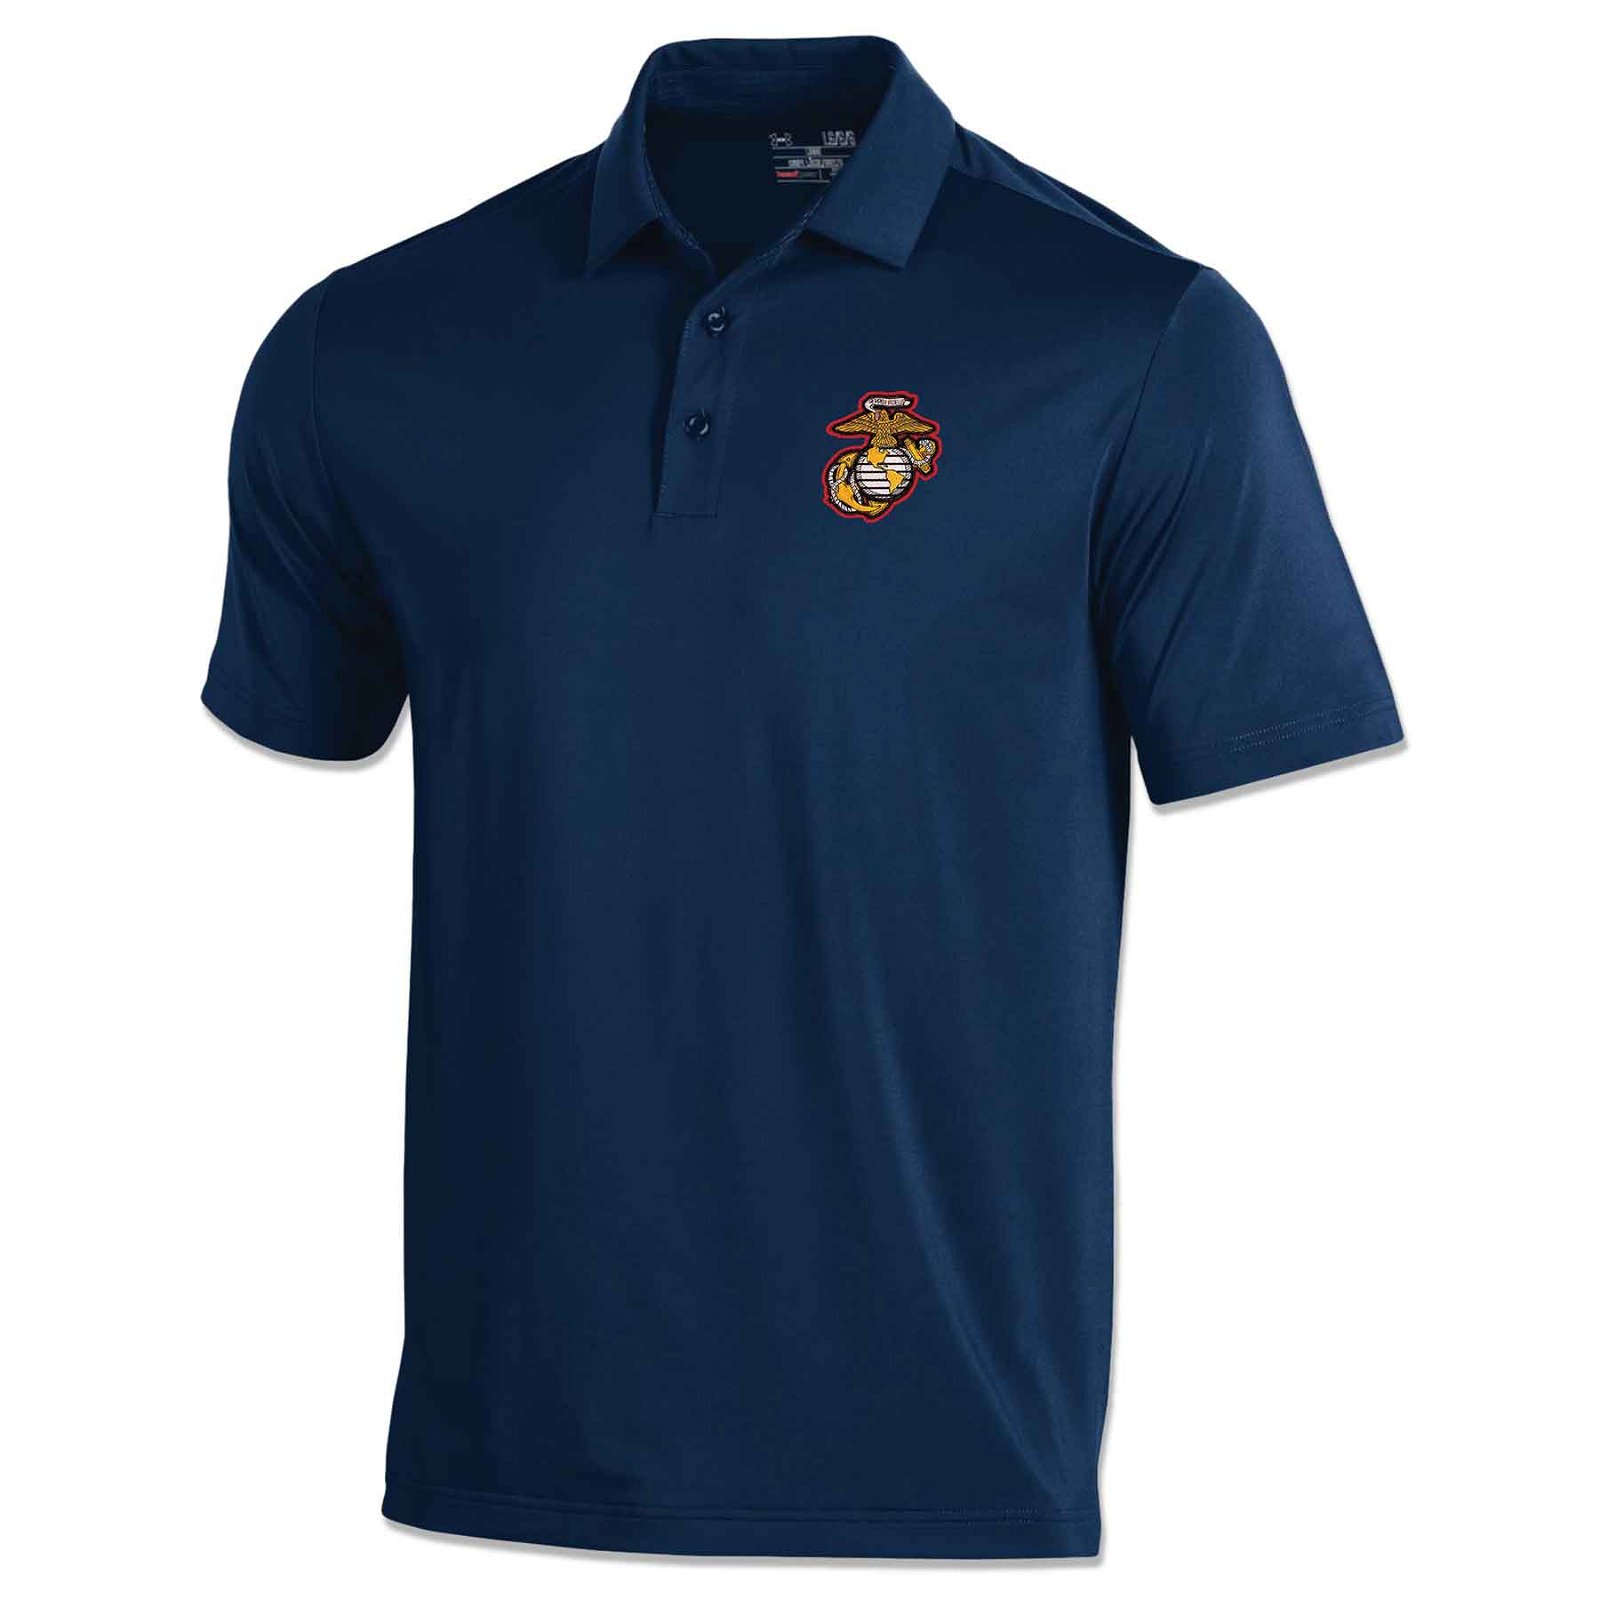 Image of Under Armour Tech Polo With EGA